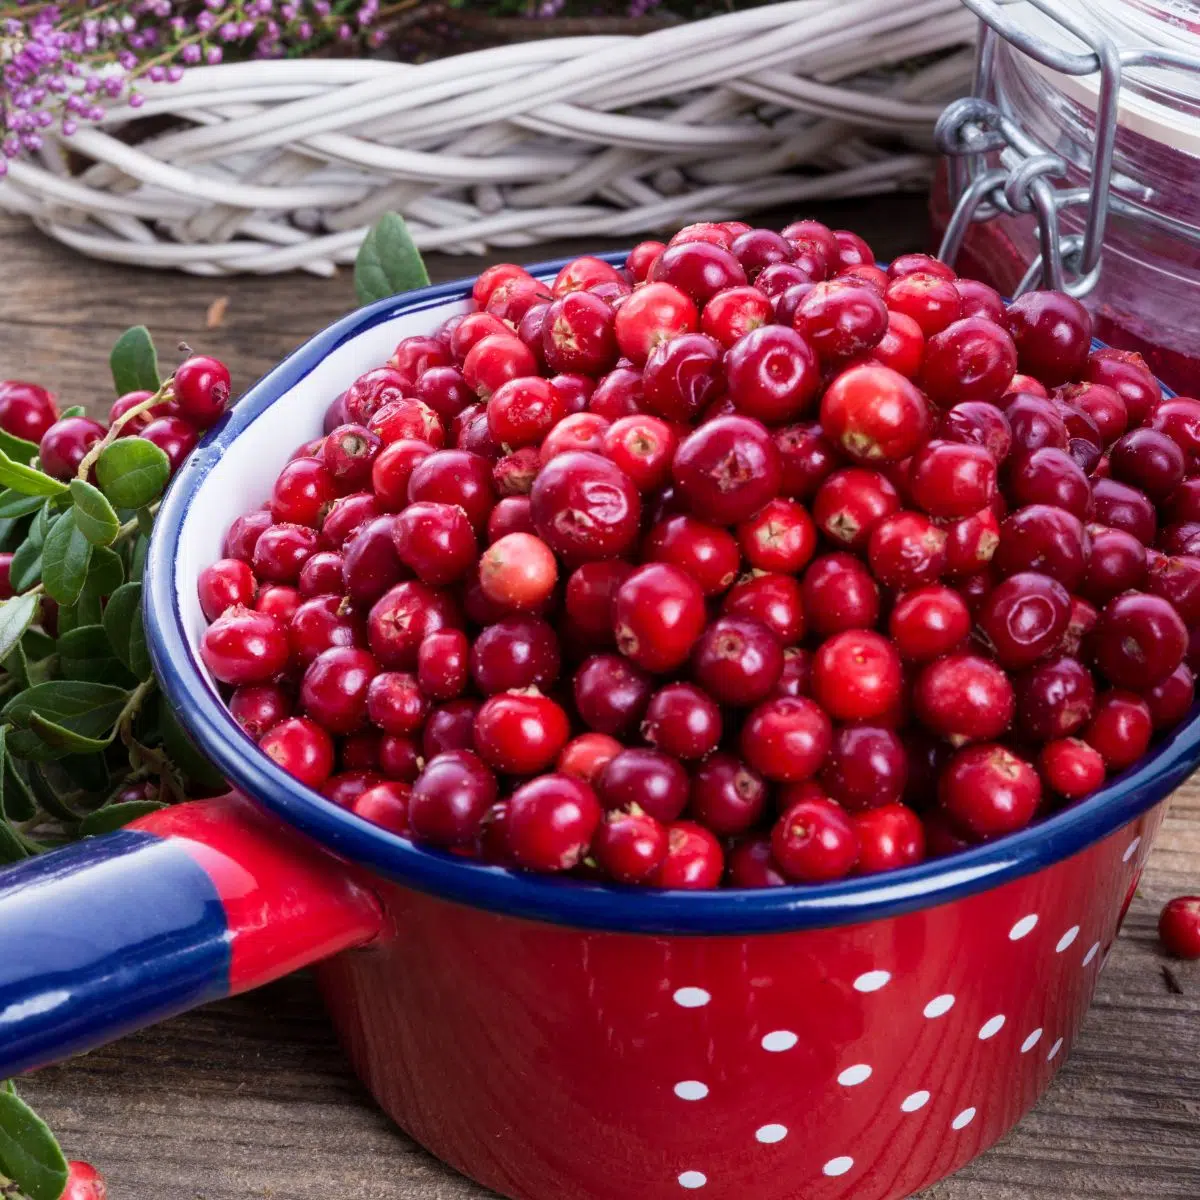 Square image of lingonberries in a pot.